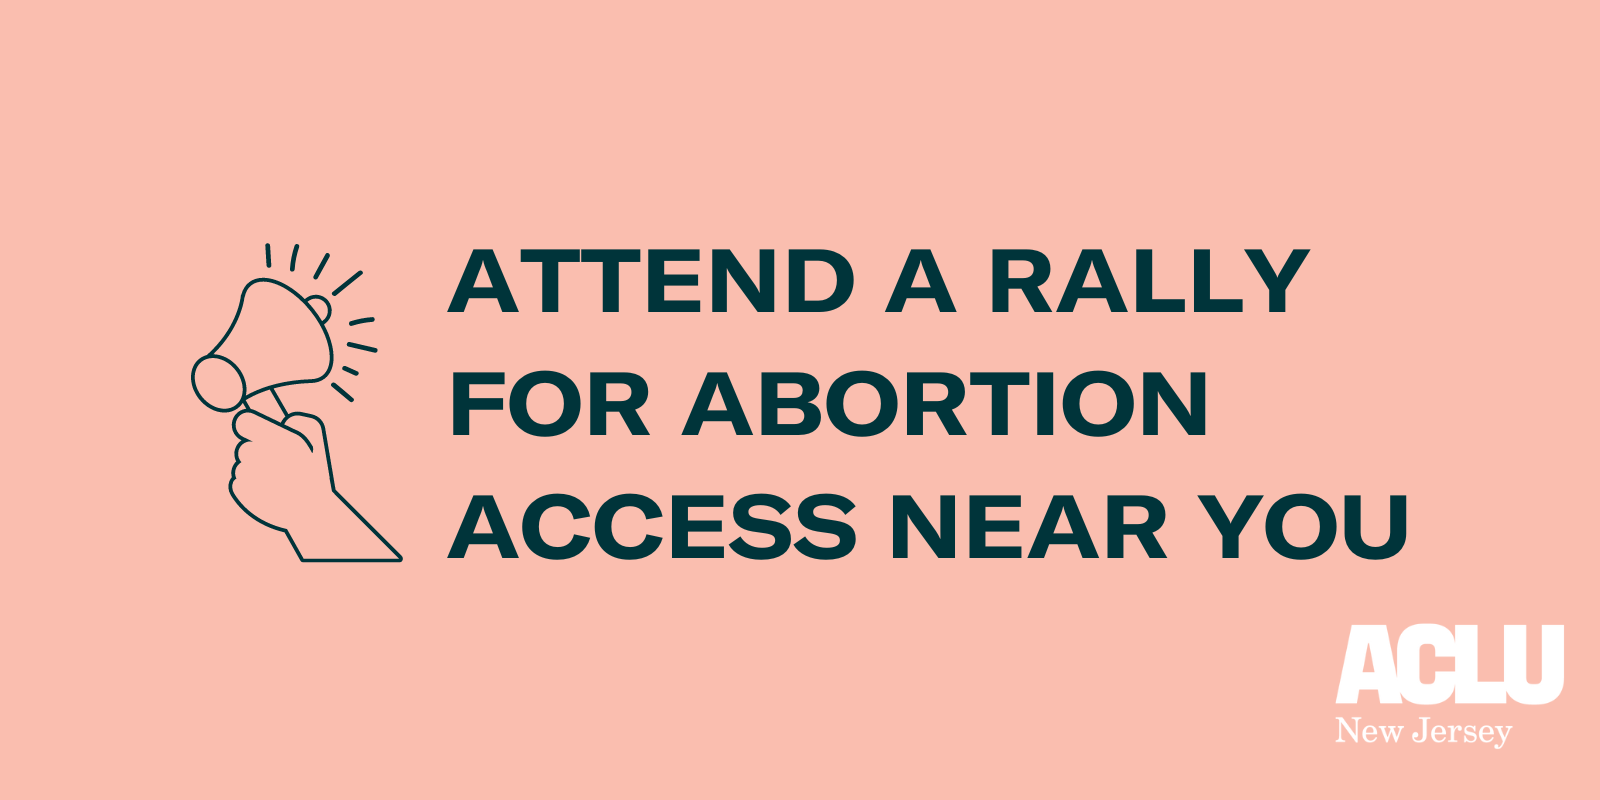 An illustration of a raised hand holding a bullhorn next to copy that reads "attend a rally for abortion access near you"